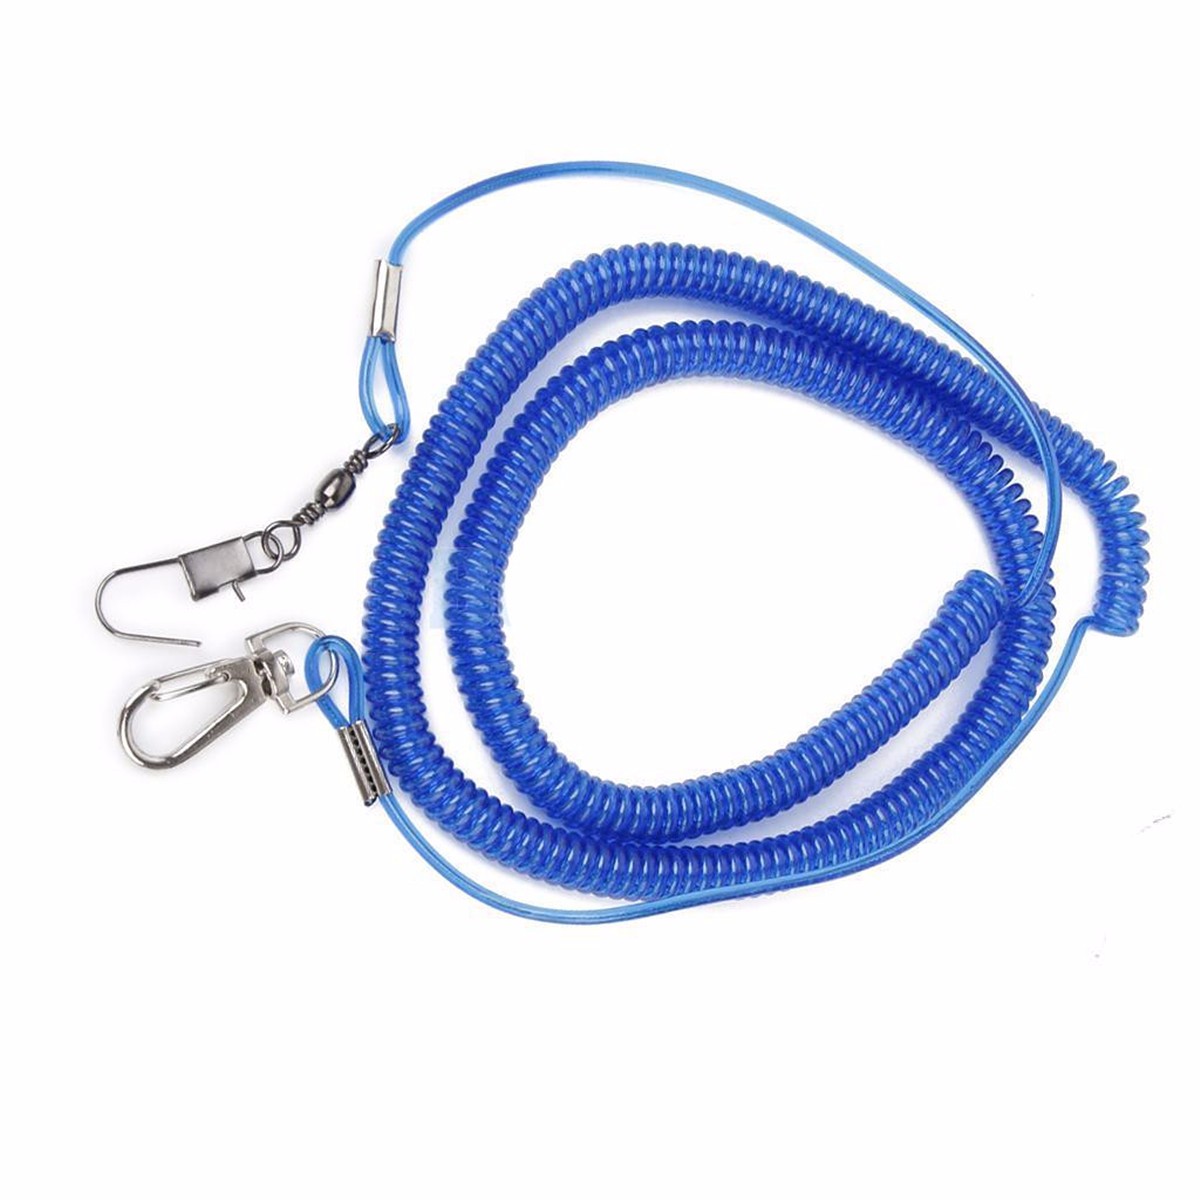 Anti-bite-Parrot-Flying-Training-Rope-Bird-Lead-Leash-Kits-Outdoor-Flying-Rope-Jumping-for-Cockatiel-1463249